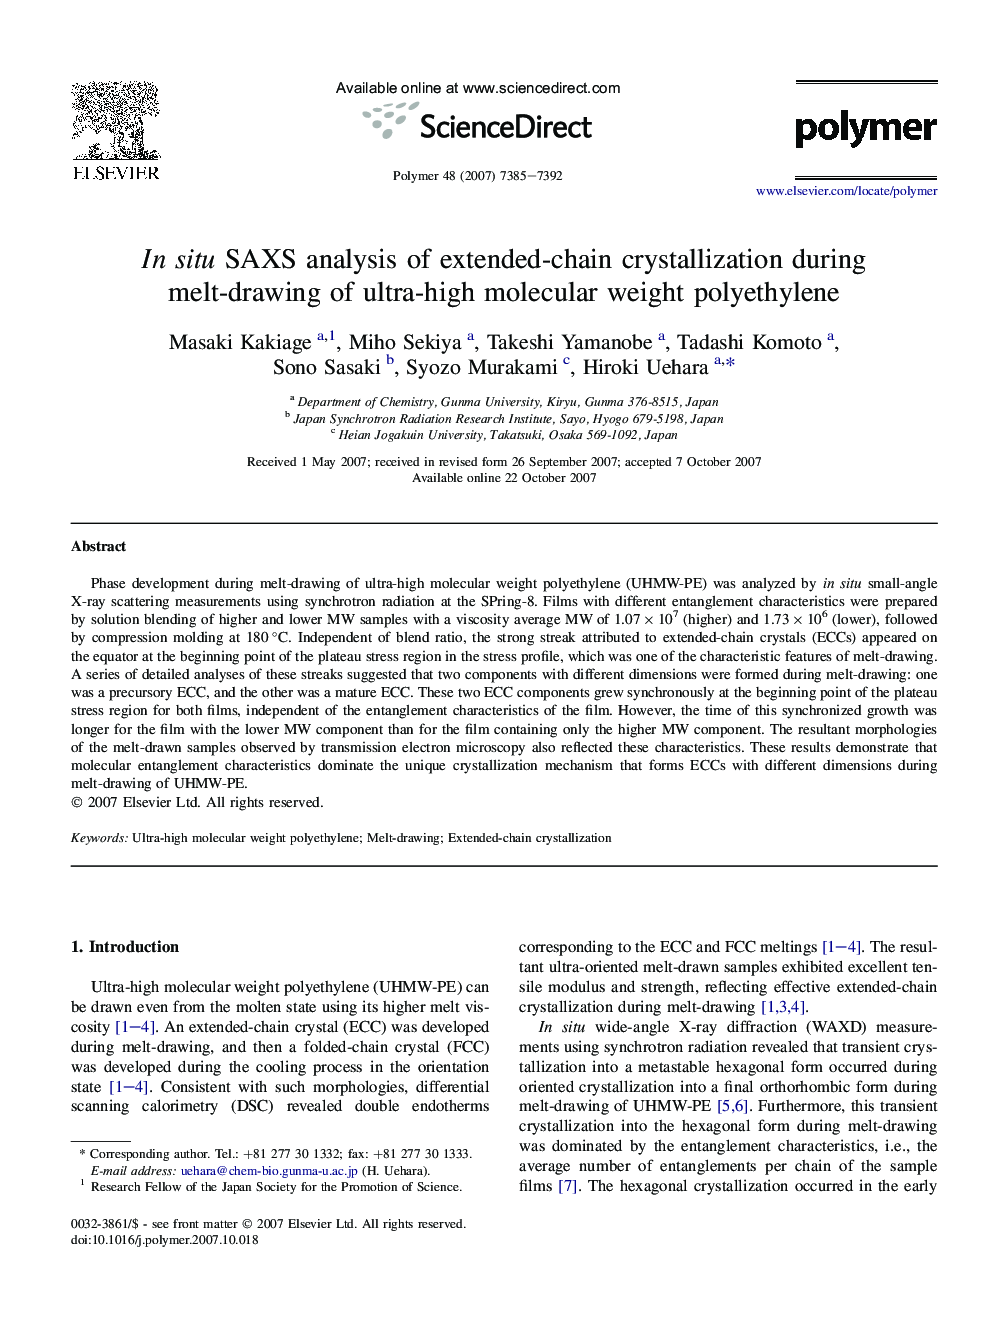 In situ SAXS analysis of extended-chain crystallization during melt-drawing of ultra-high molecular weight polyethylene